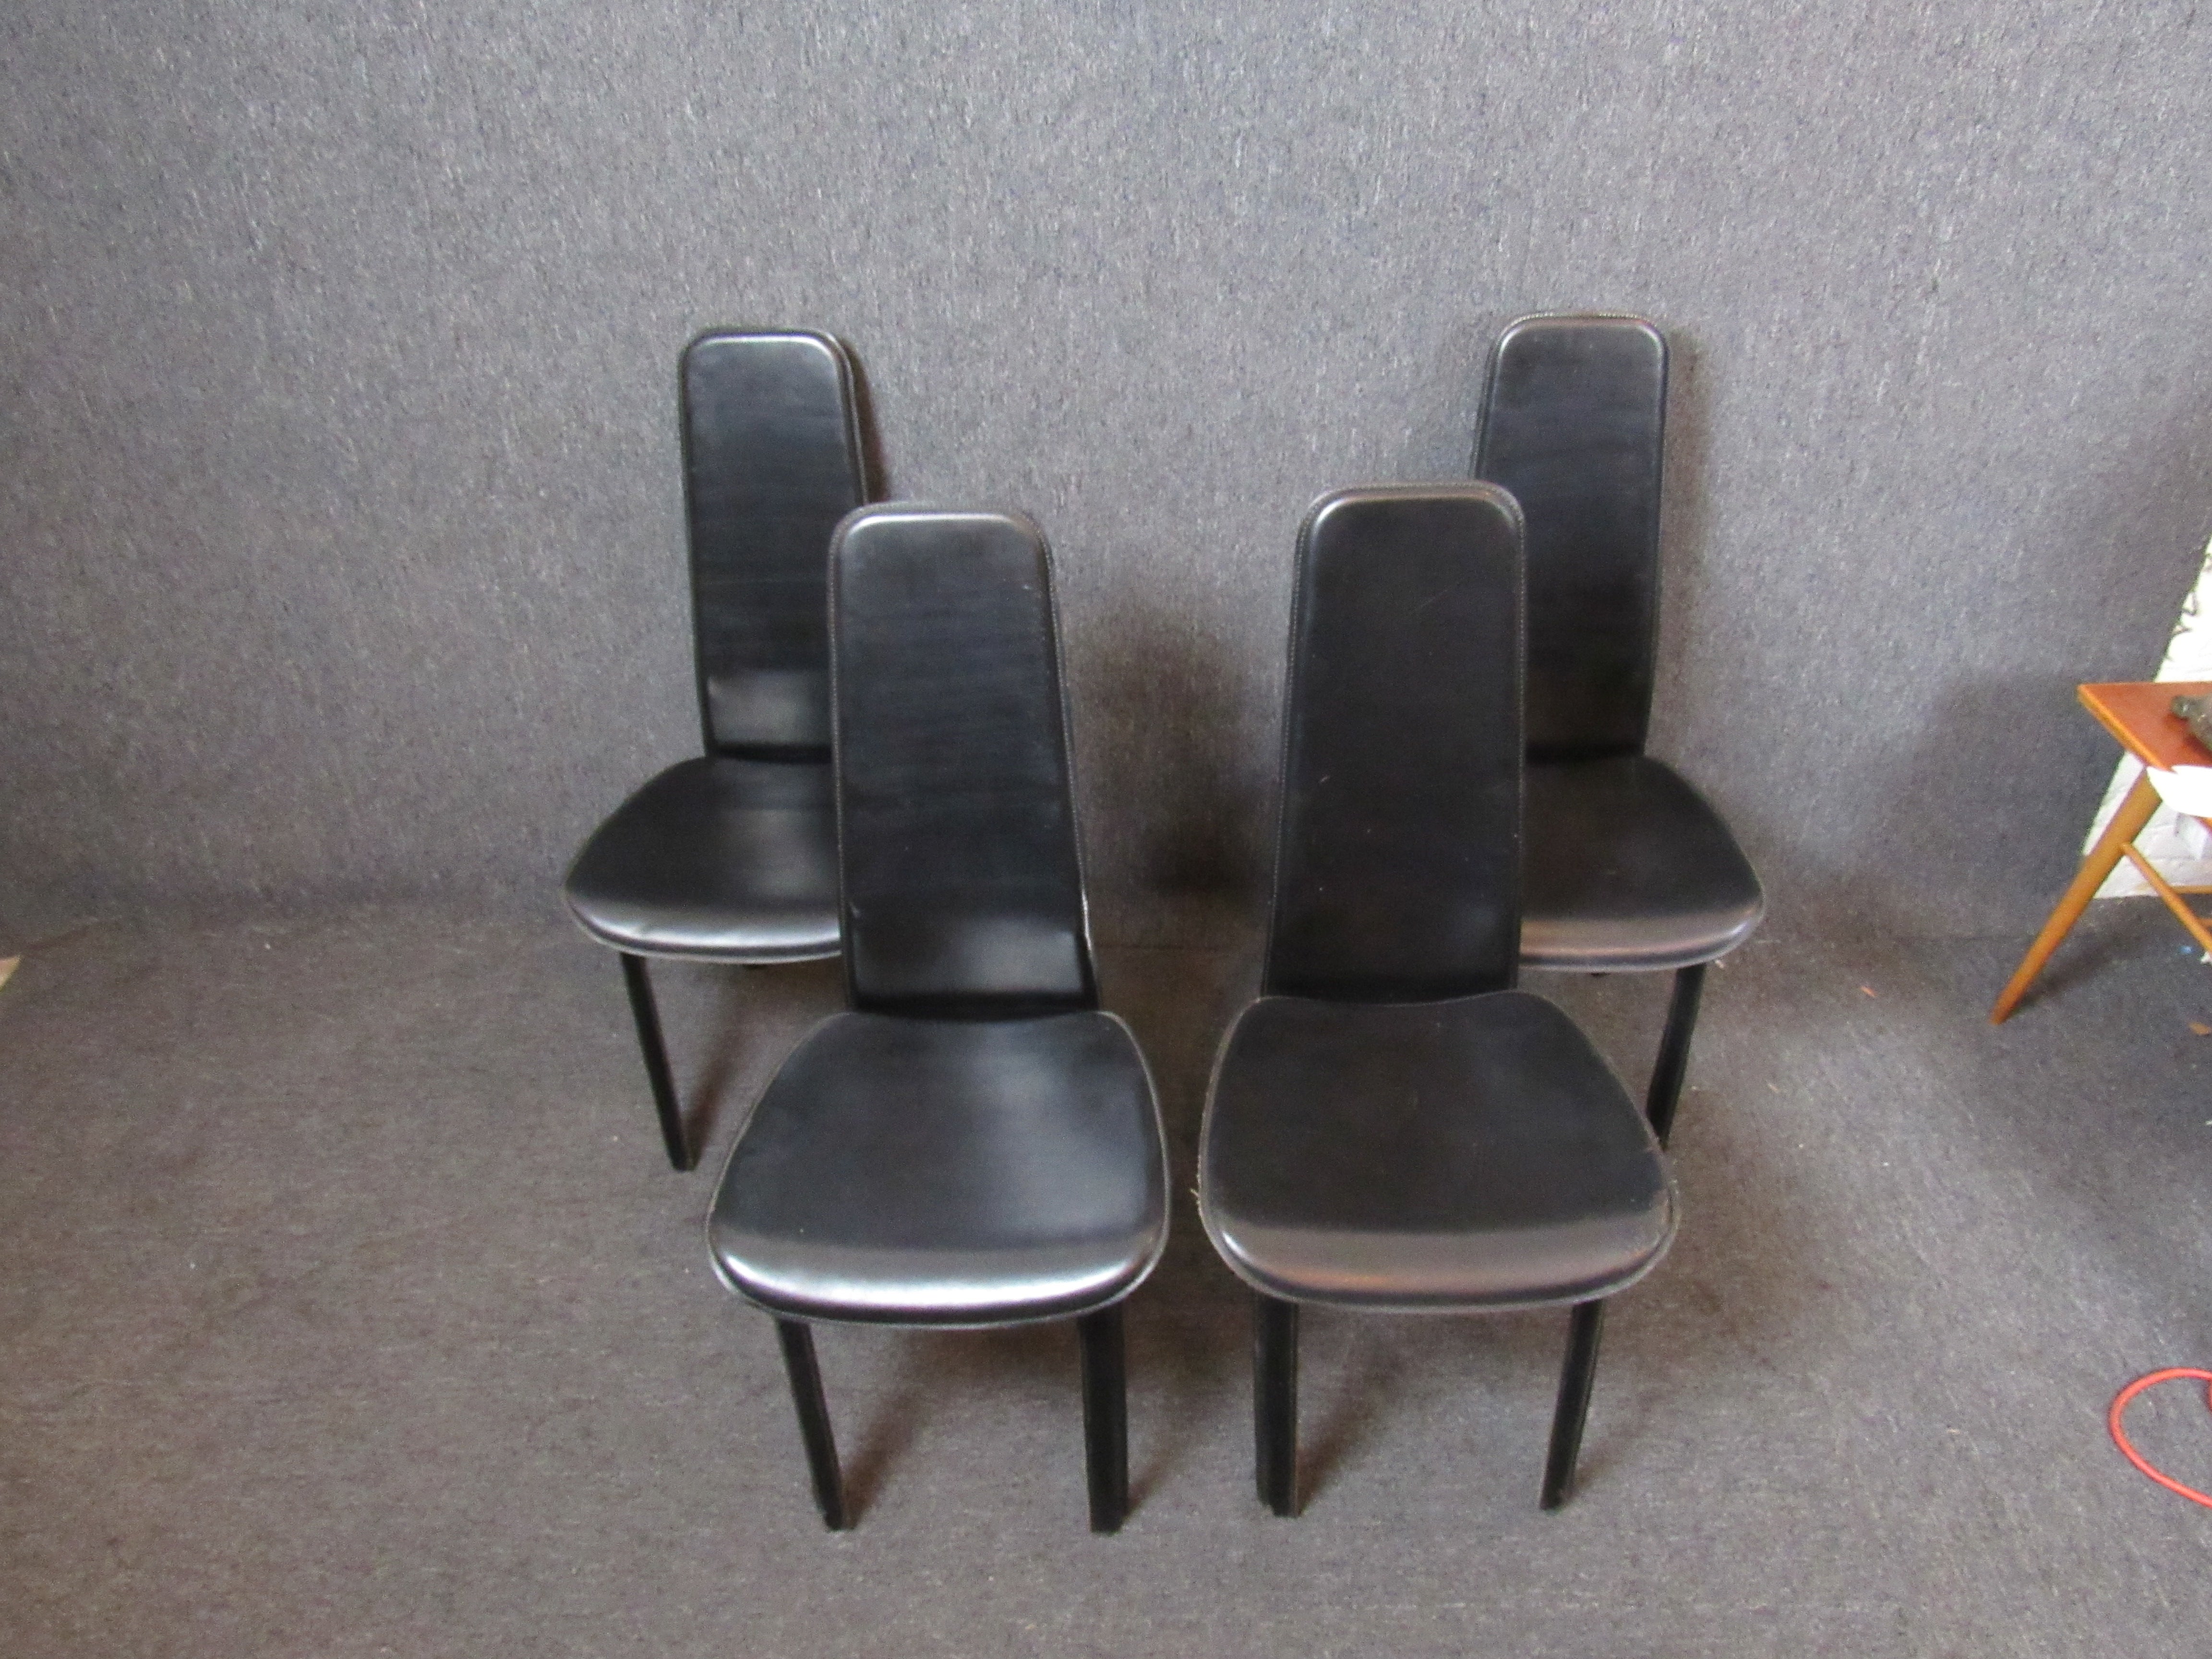 Stylish set of four mid-century Italian black vinyl dining chairs by Cidue. A sleek, distinguished profile is sure to add a sense of class to any kitchen or dining room. (Please confirm item location - NY or NJ - with dealer).